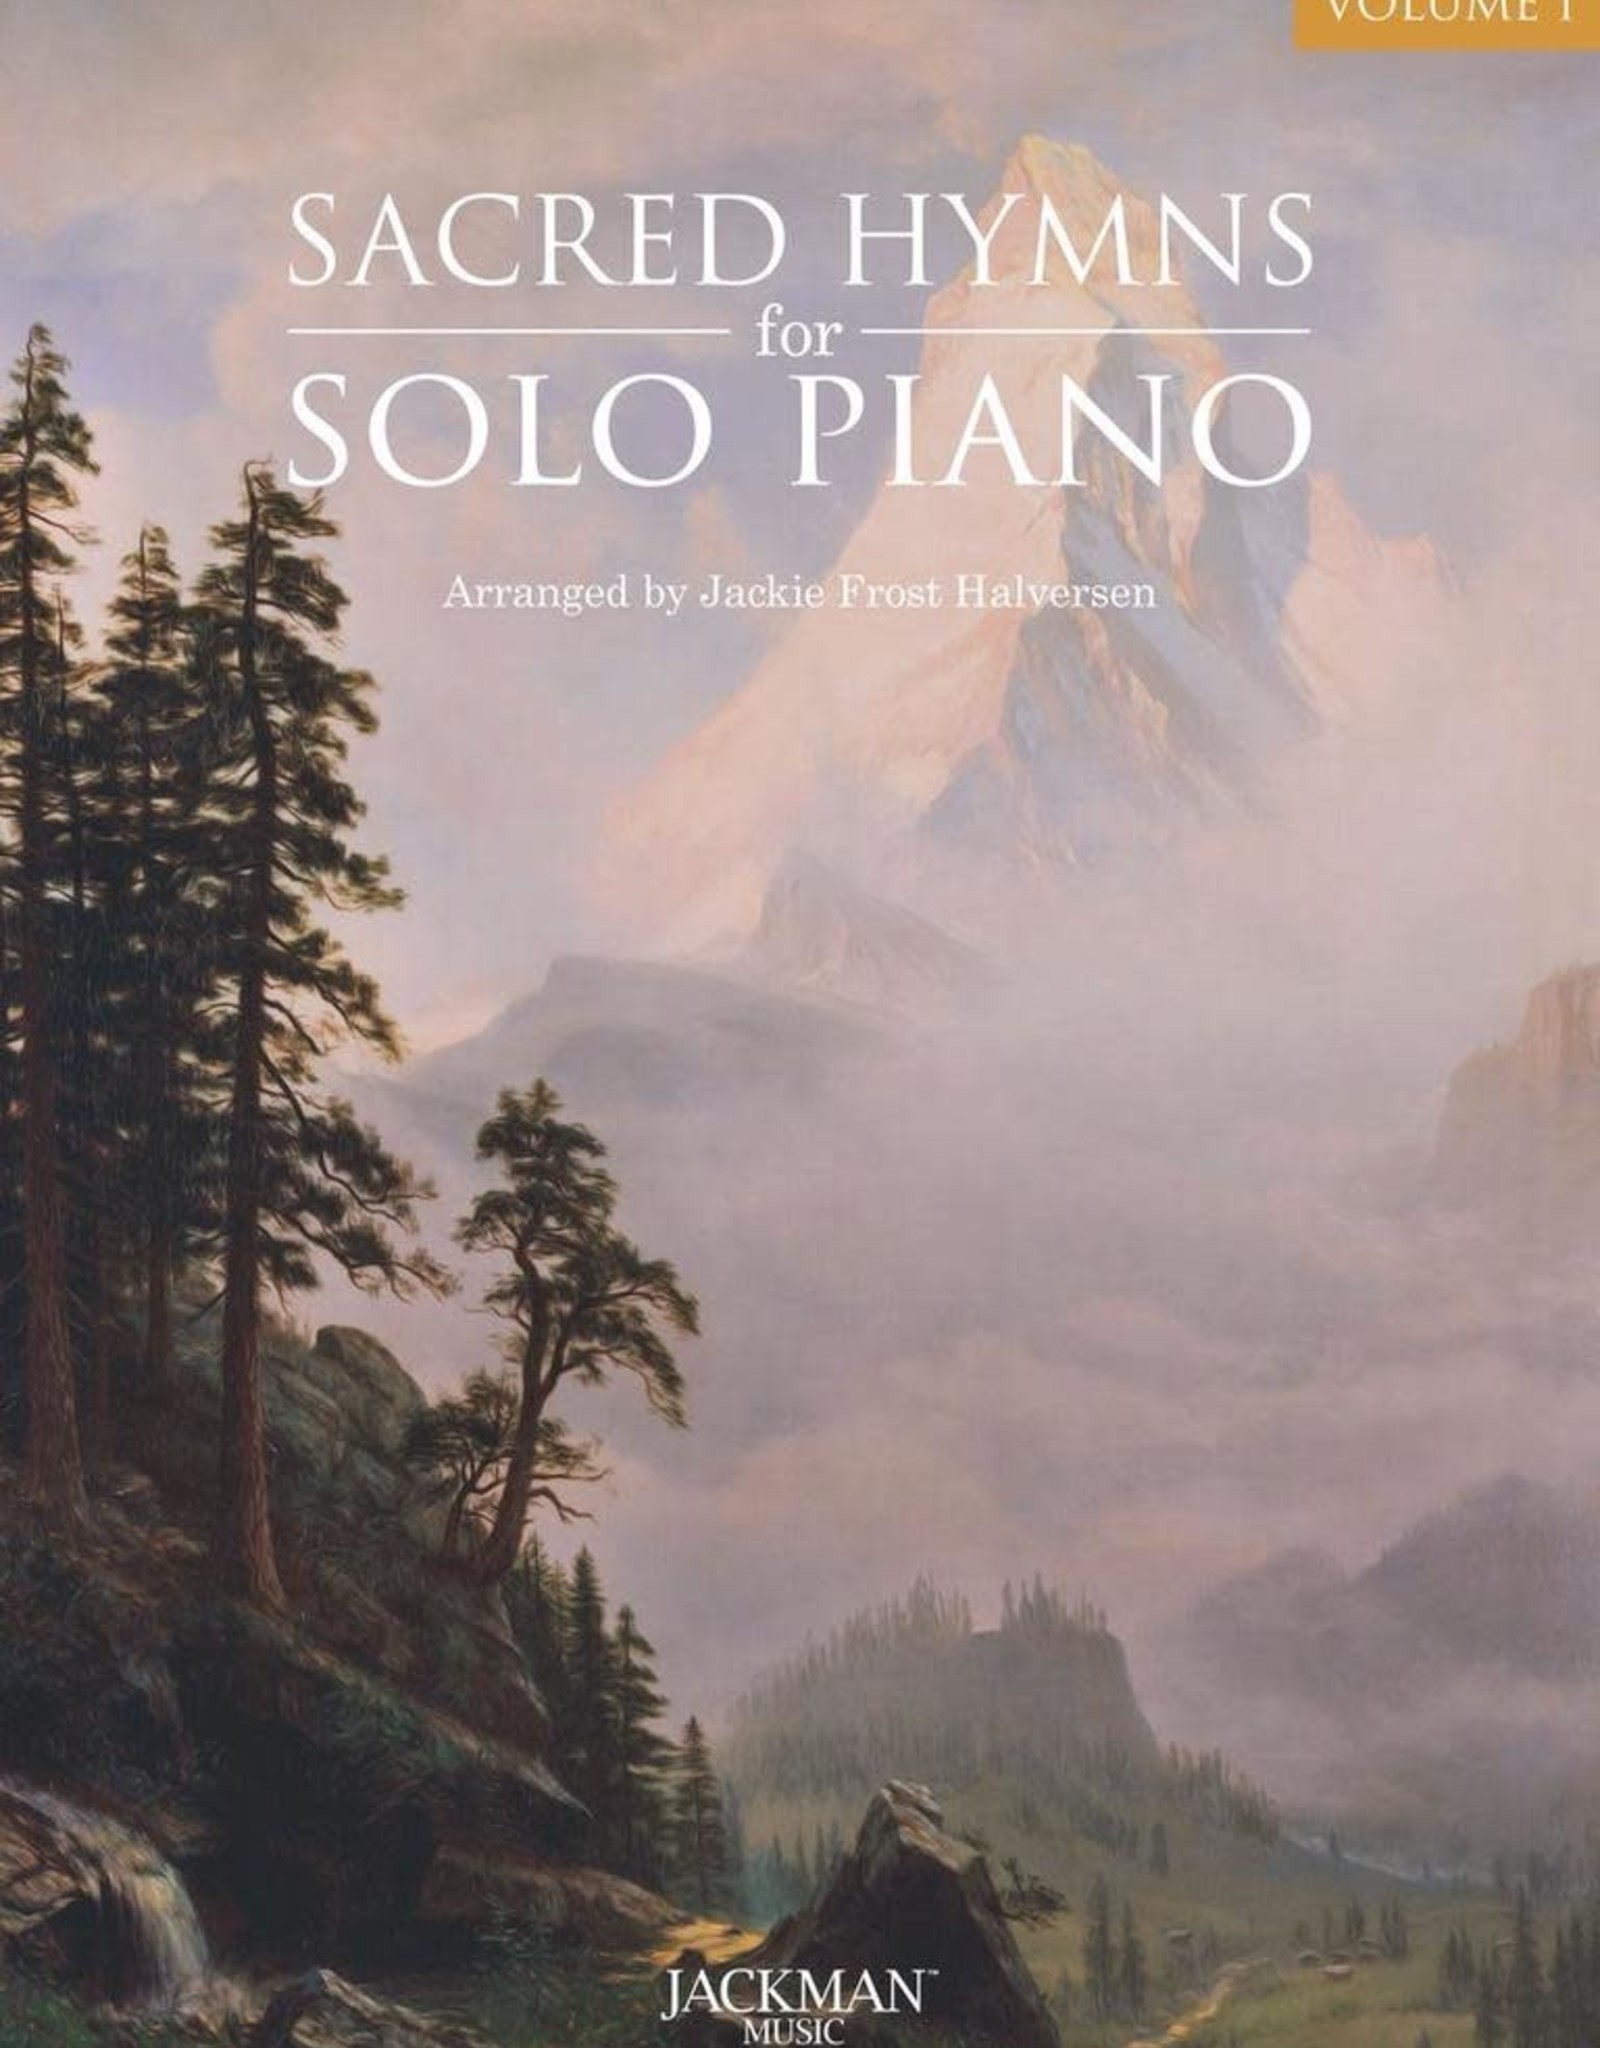 Jackman Music Sacred Hymns for Solo Piano Volume 1 arr. Jackie Frost Halversen